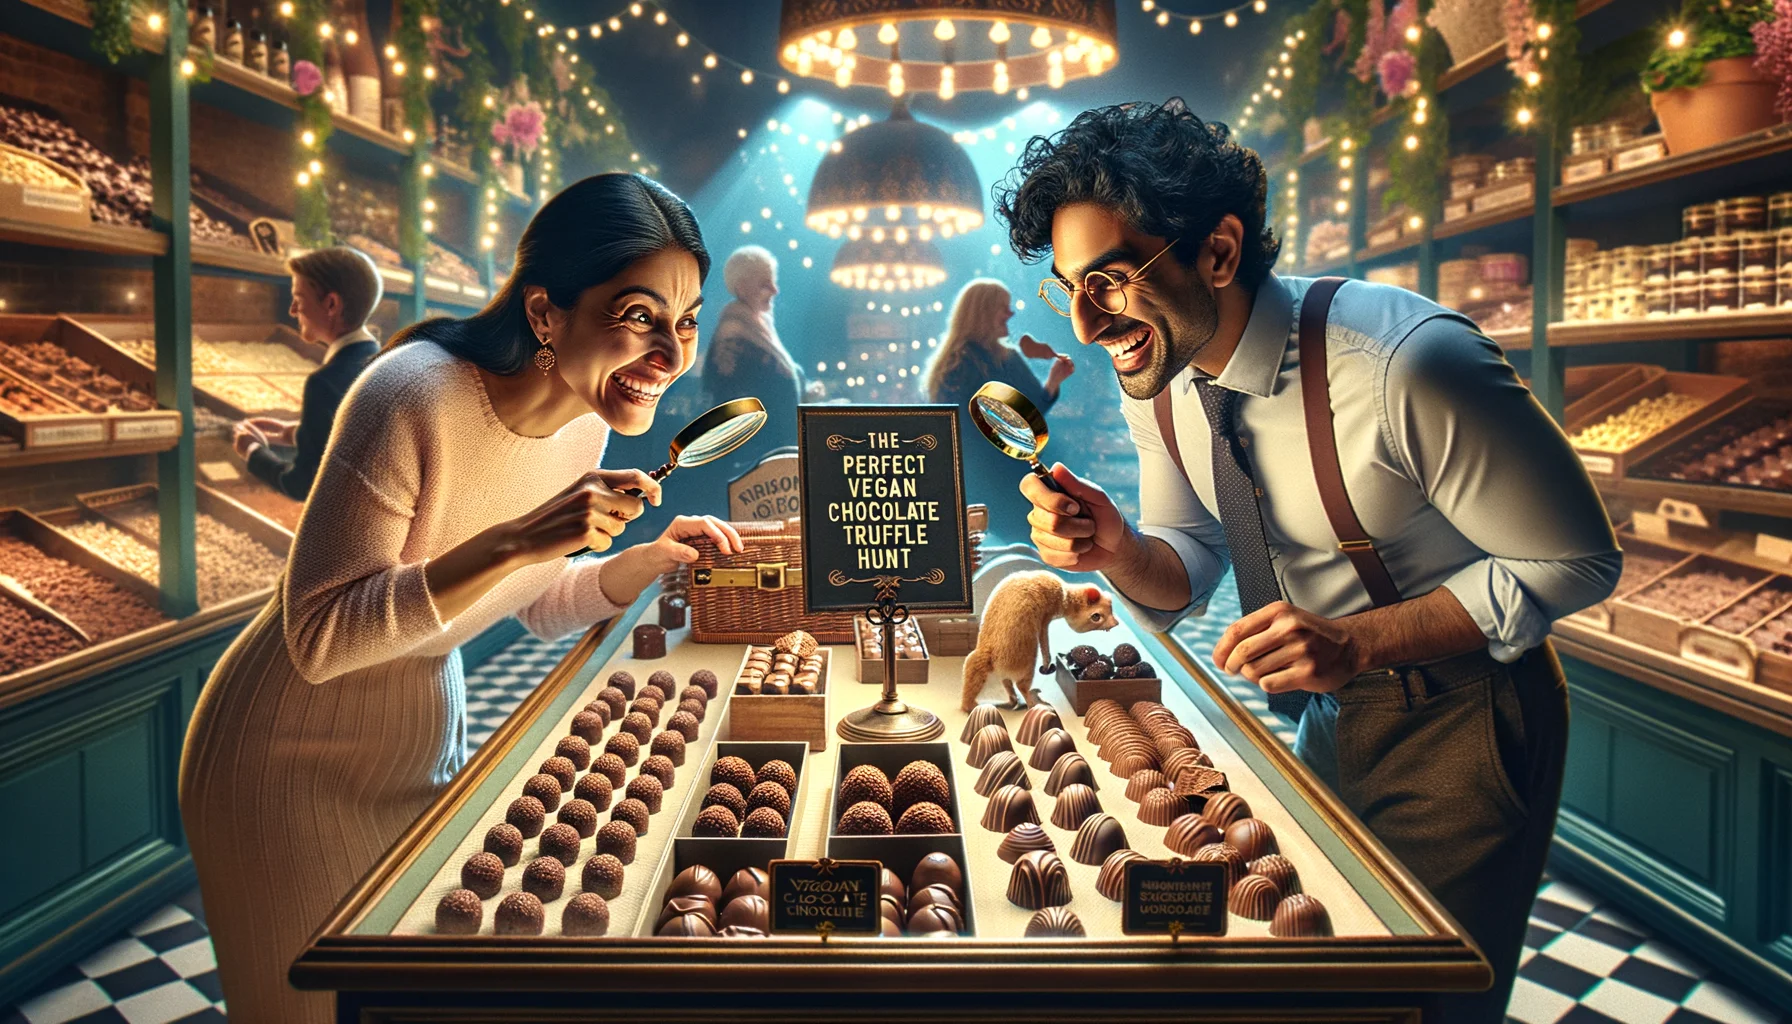 Create a realistic and humorous image set in an enchantingly illuminated boutique chocolate store. At the heart of the scene, a South Asian woman and a Hispanic man are joyfully indulging in the process of choosing from an exquisite array of vegan chocolate truffles. They observe each chocolate with magnifying glasses and scrutinize ingredients intensely, suggesting a comedic hyperbole of the perfection involved in choosing the right truffle. The ambiance is enhanced with mirthful and distinct details such as a mischievous cat attempting to swipe a truffle from a low shelf, and a signboard reading 'The Perfect Vegan Chocolate Truffle Hunt.'